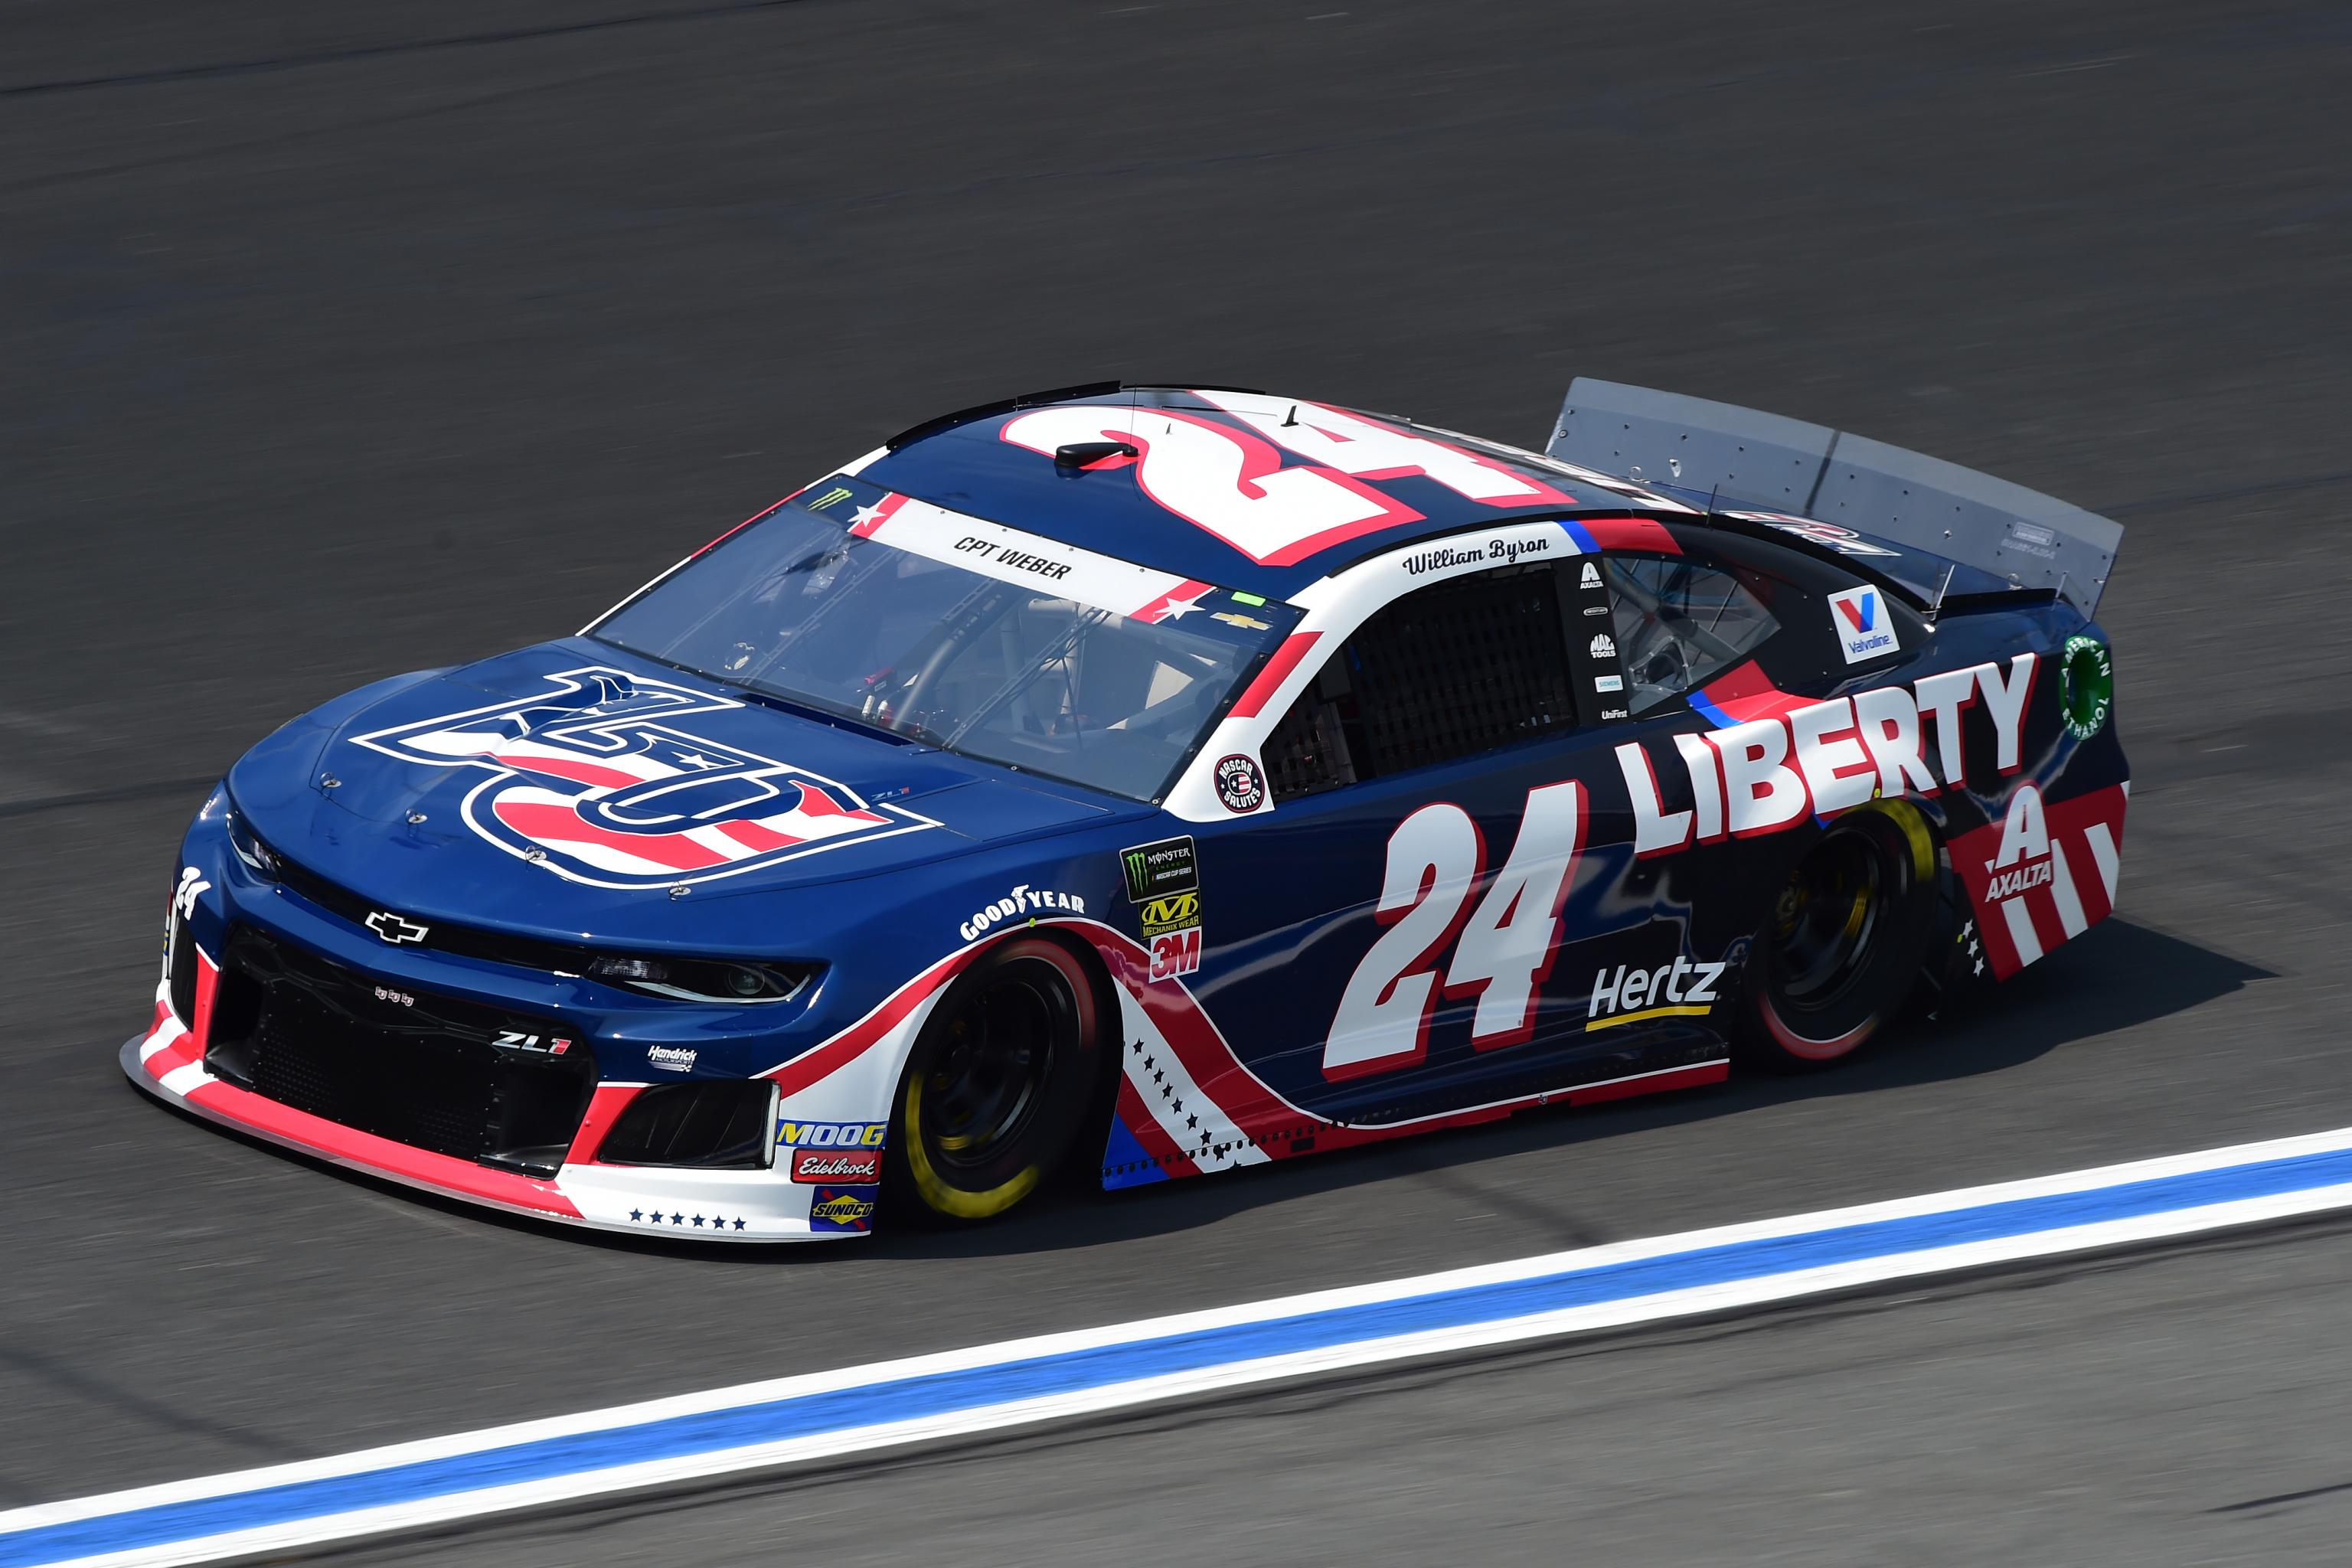 Nascar At Charlotte 2019 Qualifying Results William Byron Wins Pole Position Bleacher Report Latest News Videos And Highlights - roblox nascar 19